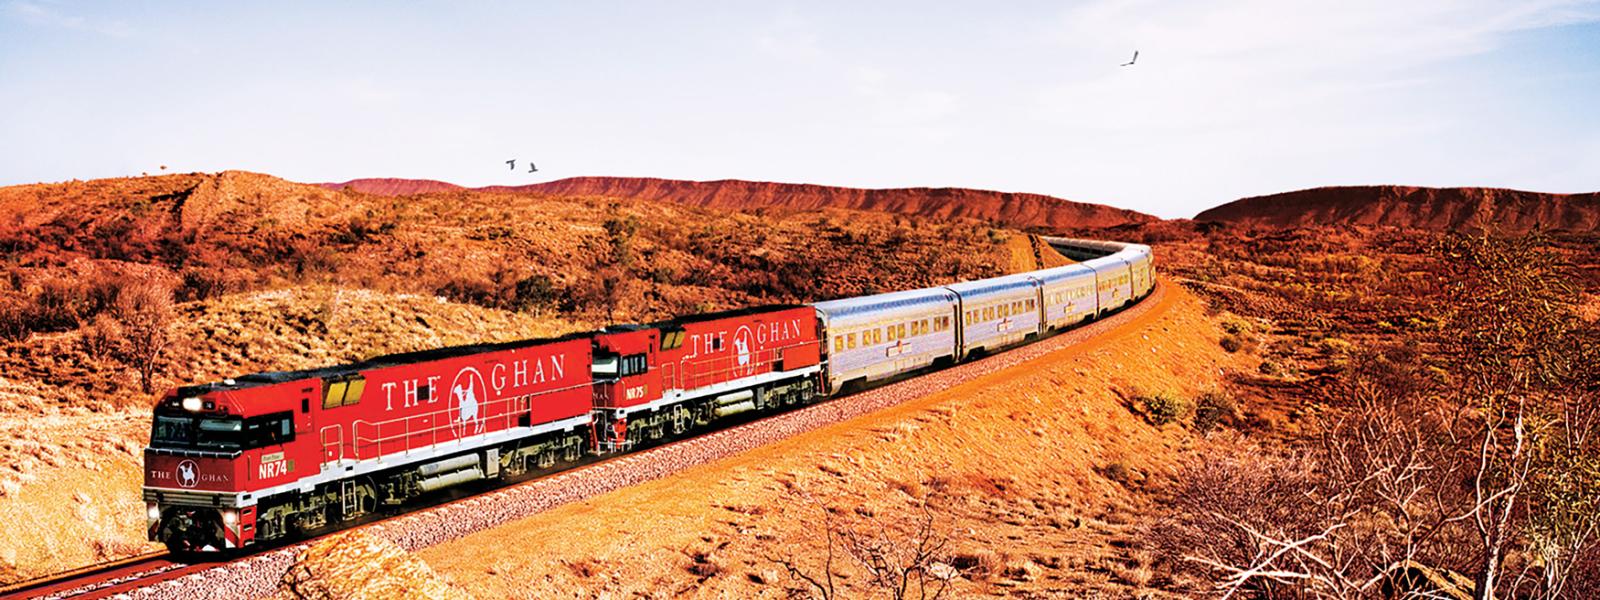 Outback Adventure & Ghan Rail Journey